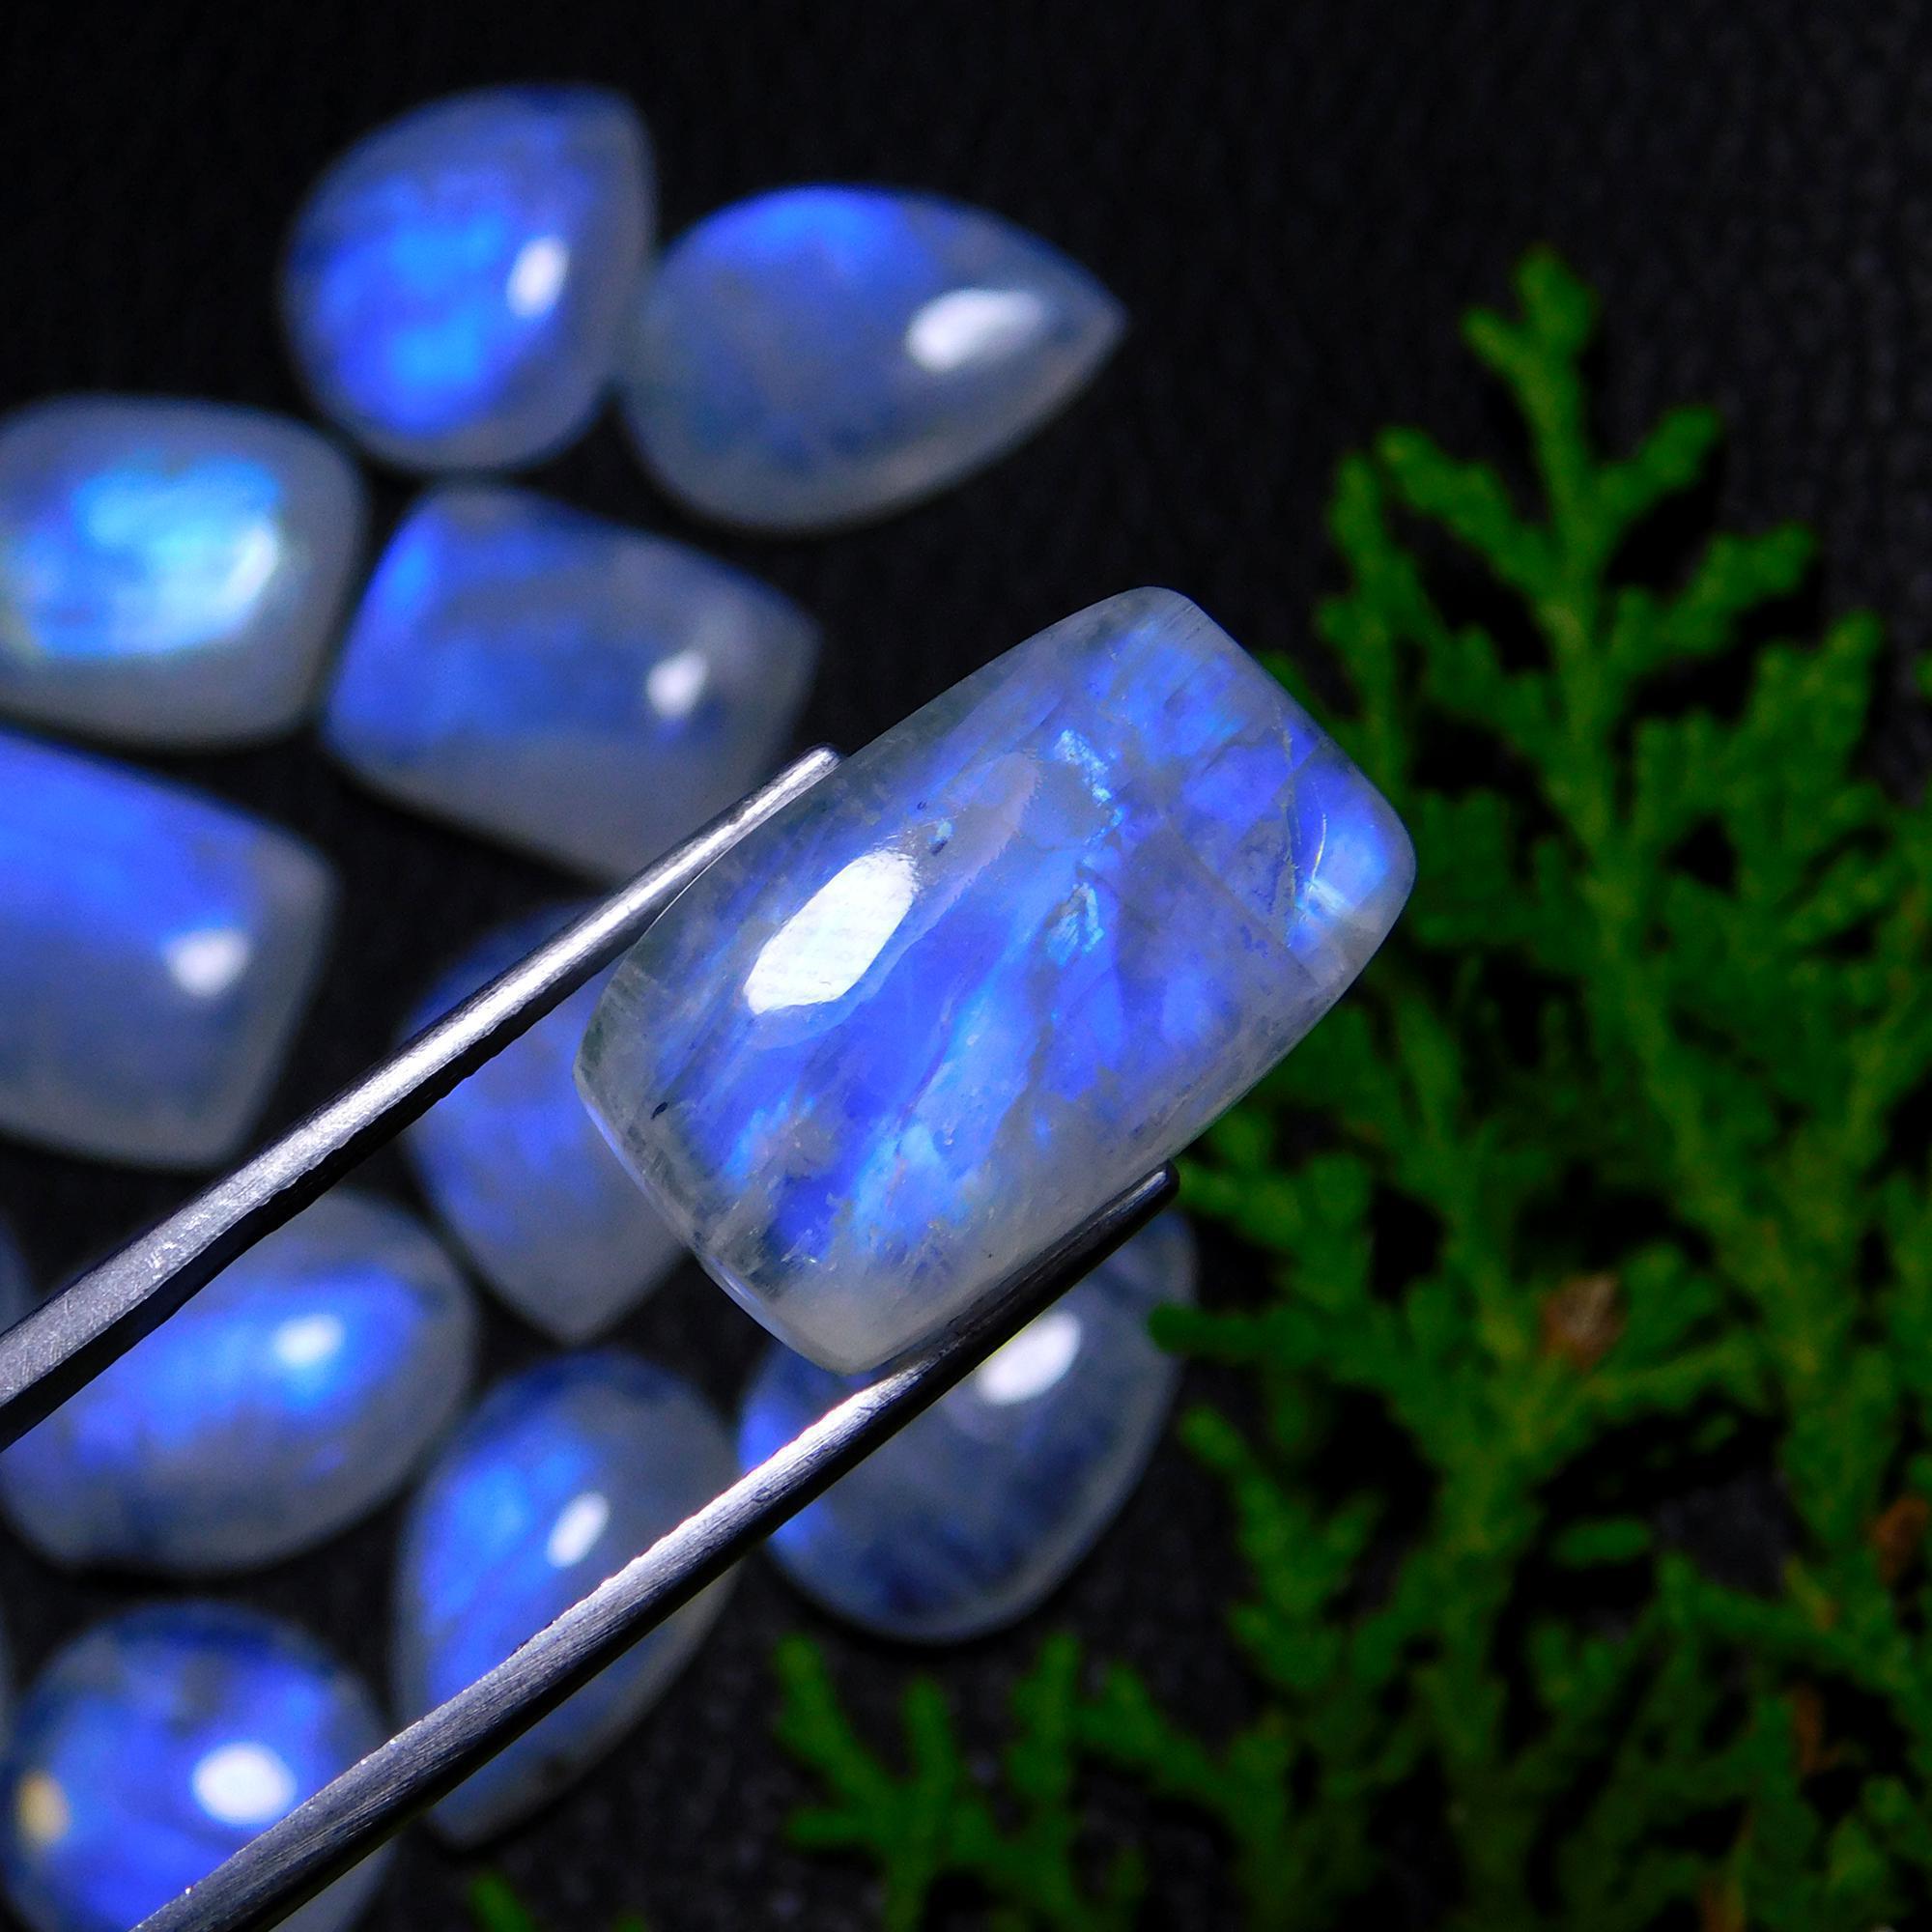 13Pcs 121Cts Natural Rainbow Moonstone Cabochon Blue Fire Loose Gemstone Crystal jewelry supplies wholesale lot gift for her Black Friday 24X14 12X12mm#9420